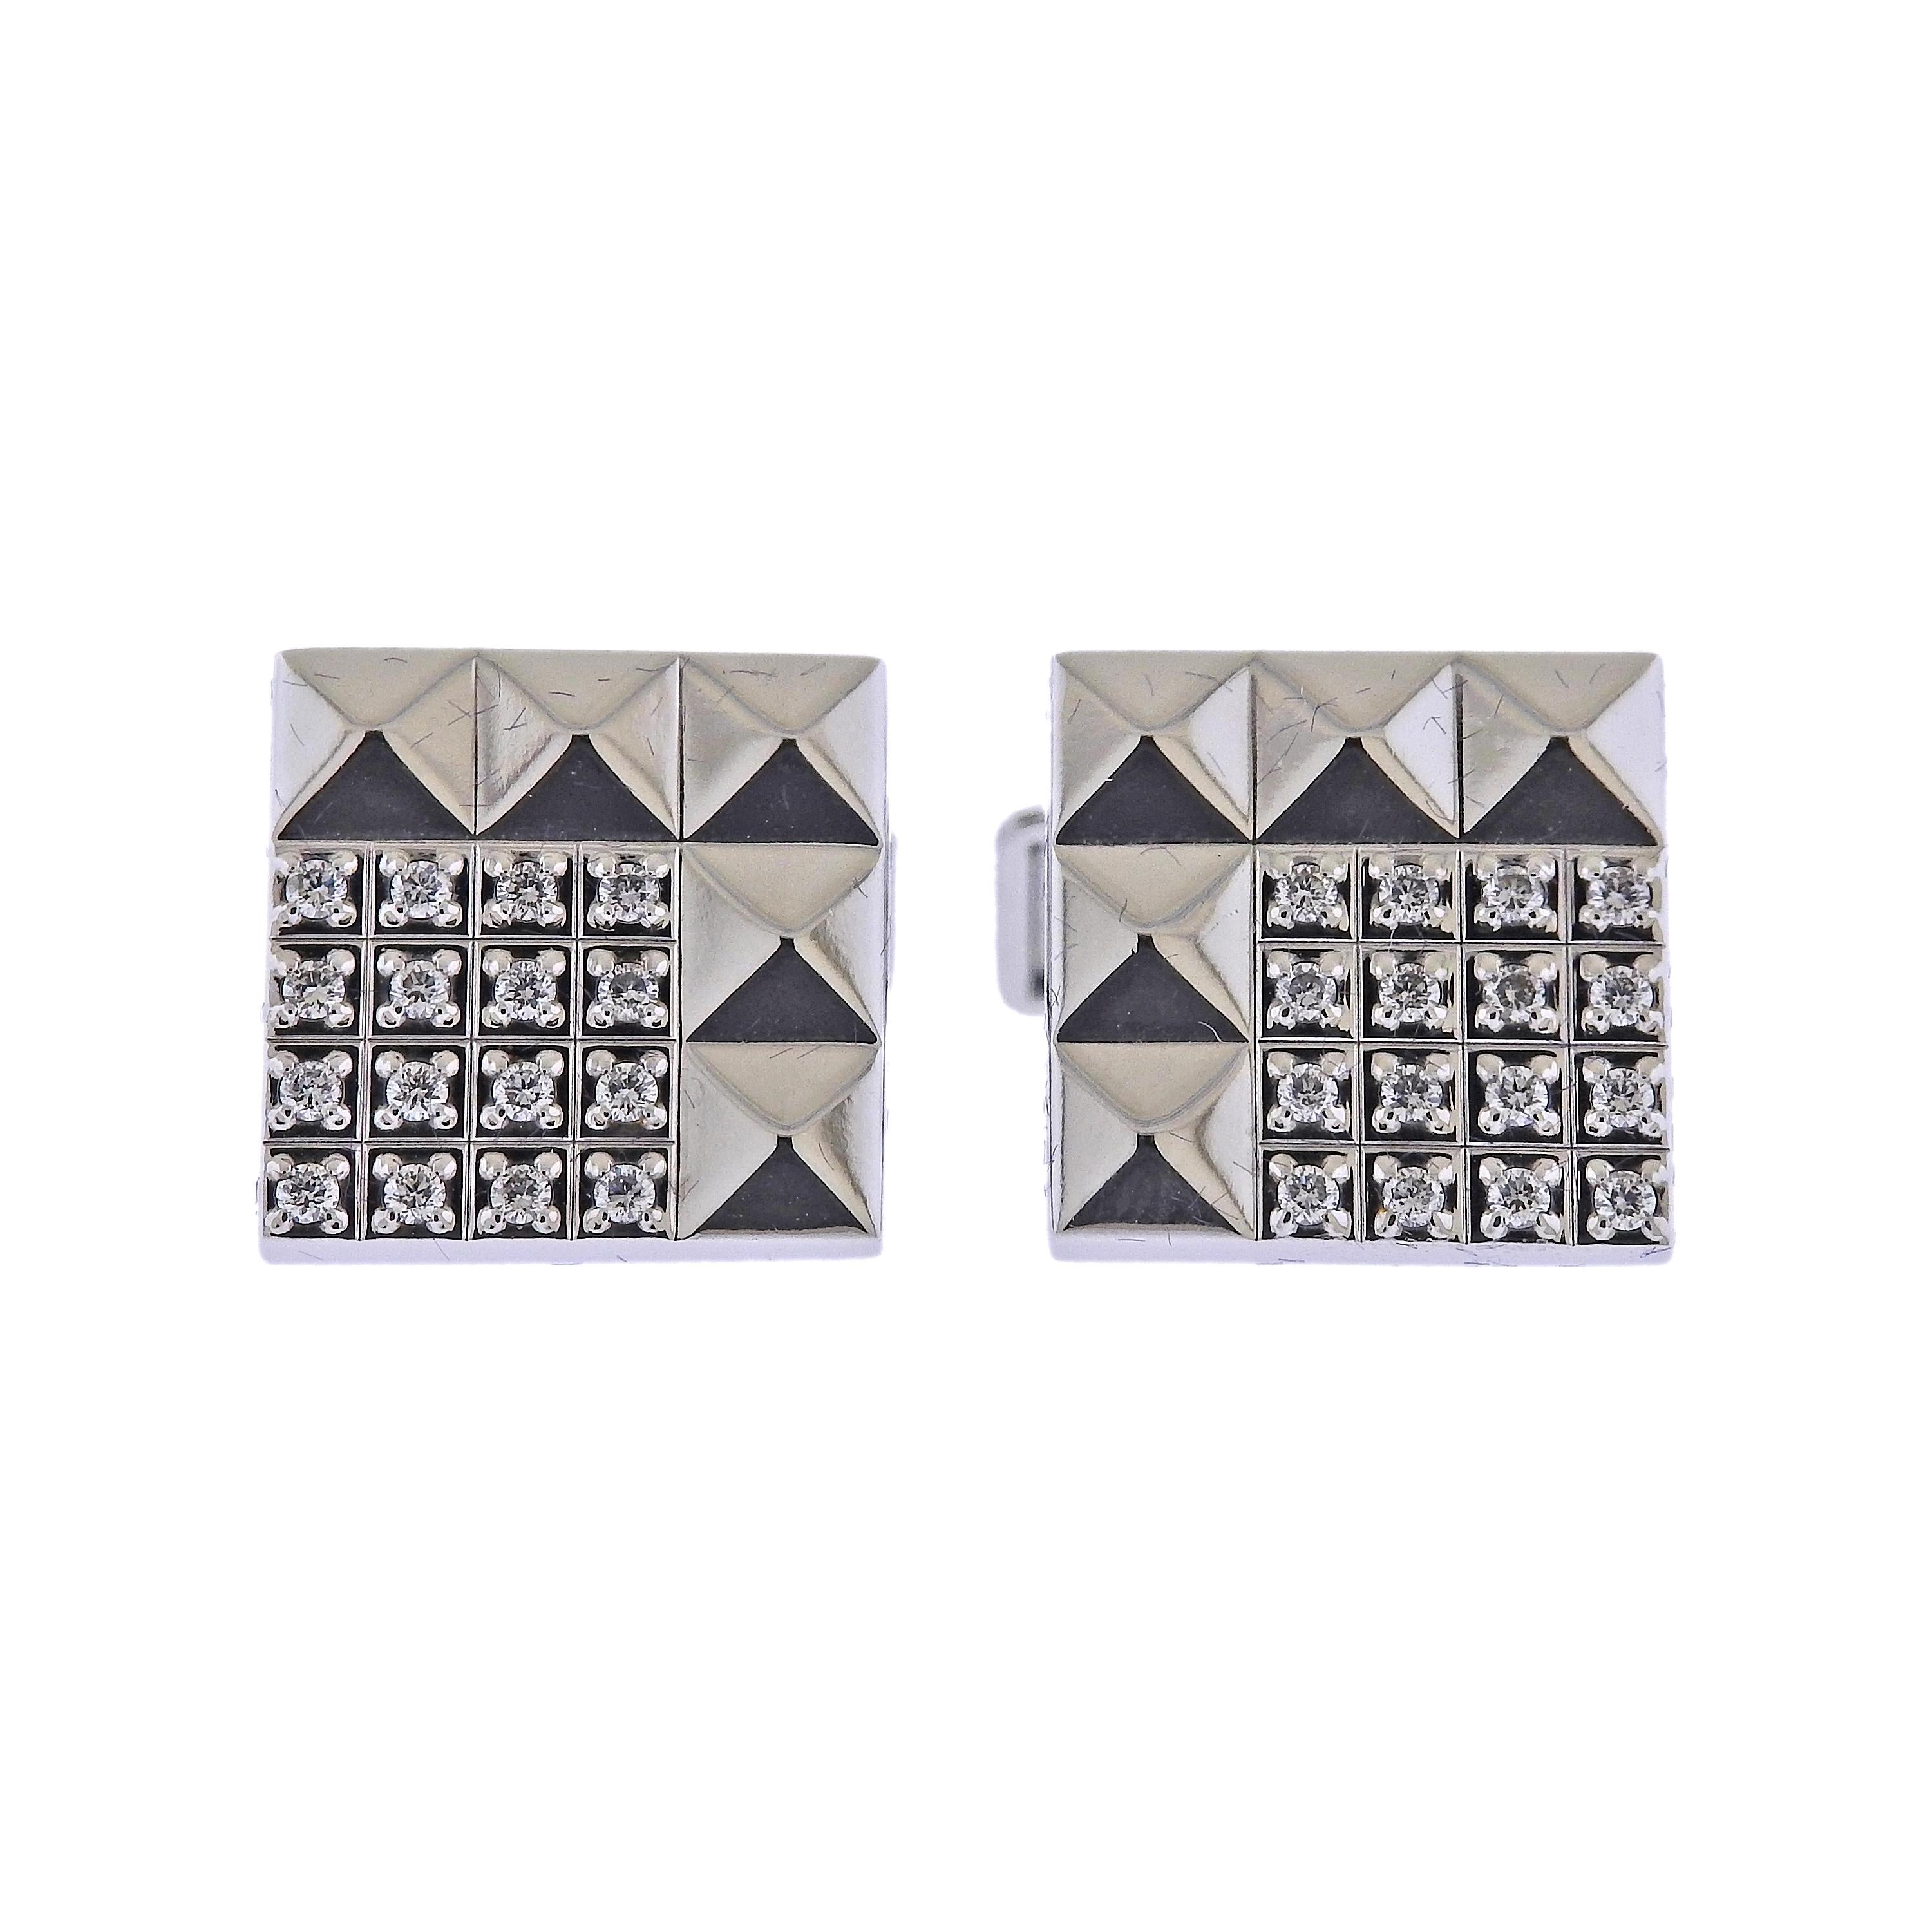 S.T Dupont Coin Black PVD Coated Stainless Steel Cufflinks Retail:$320.00 